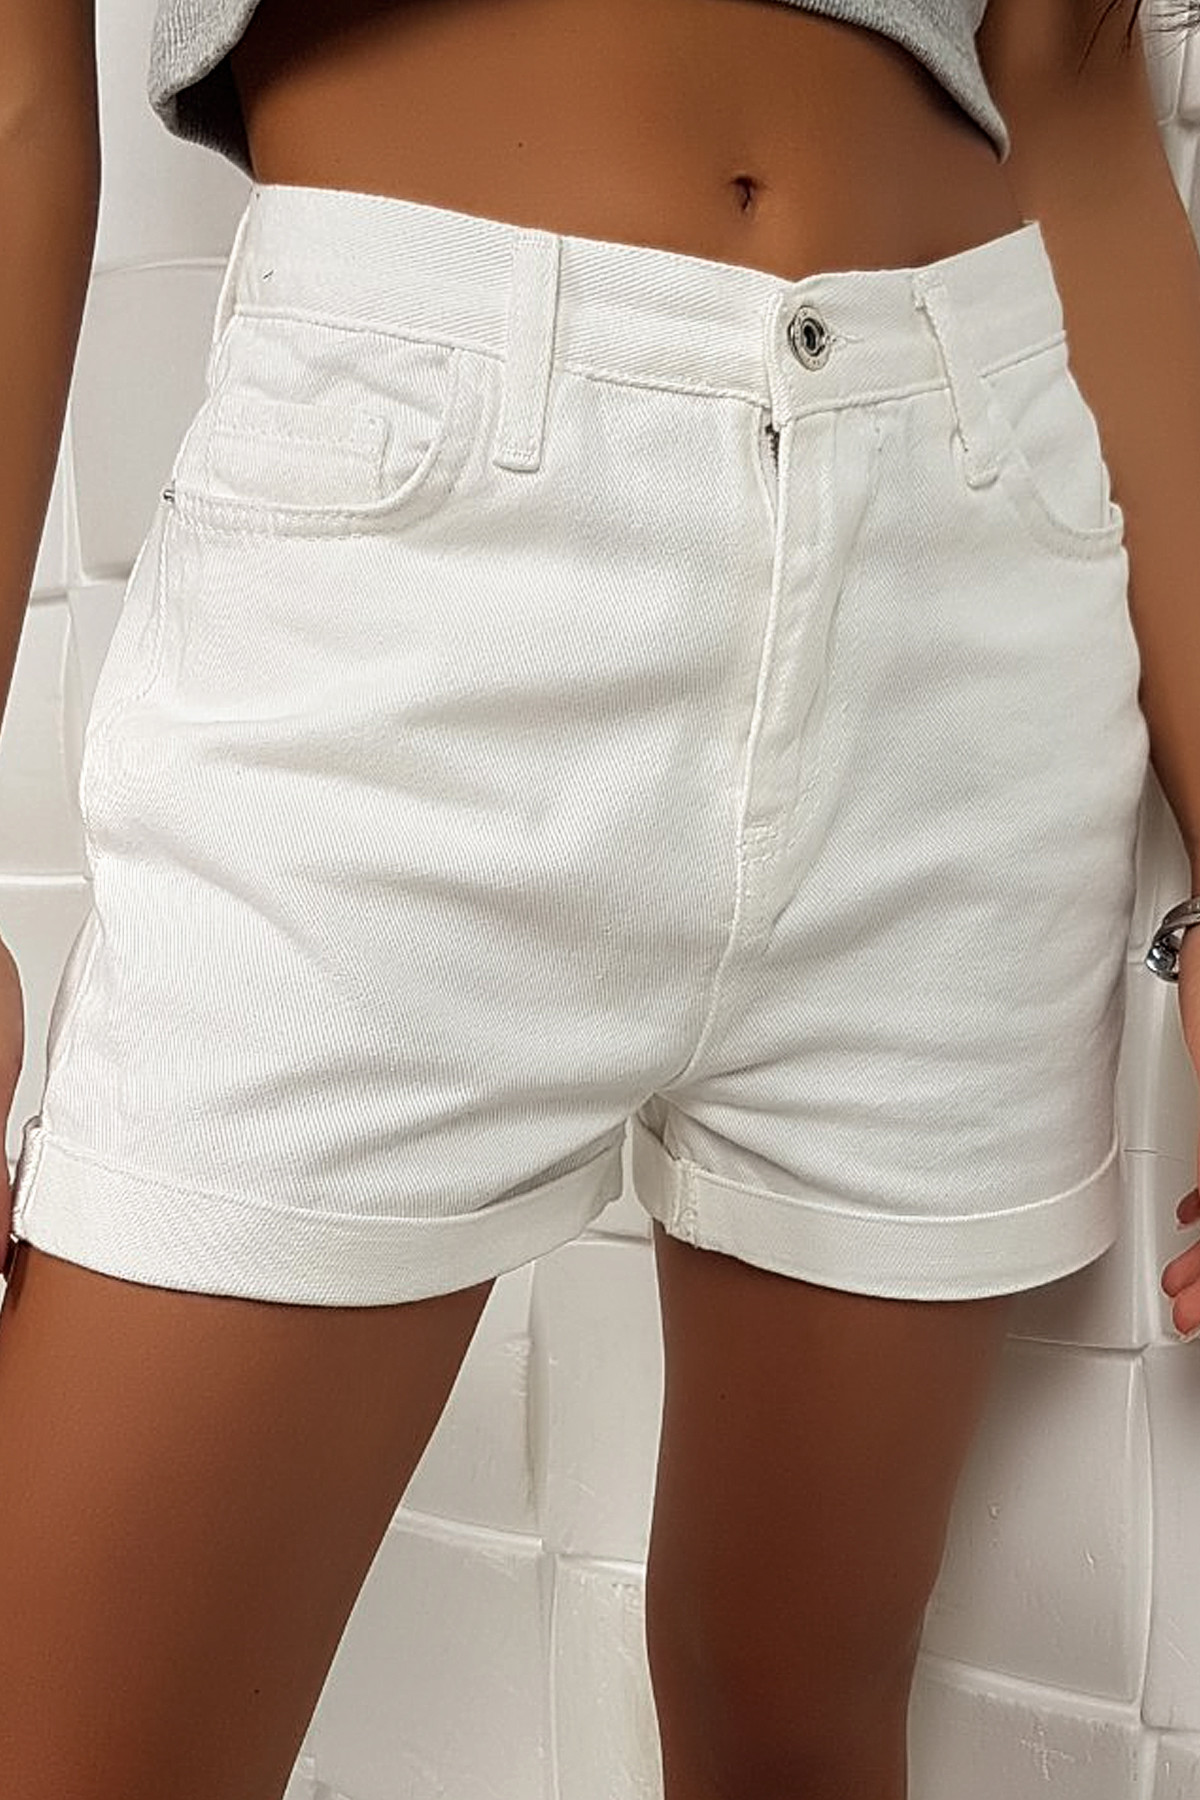 Ladies short pants   - Women's and men's clothing and